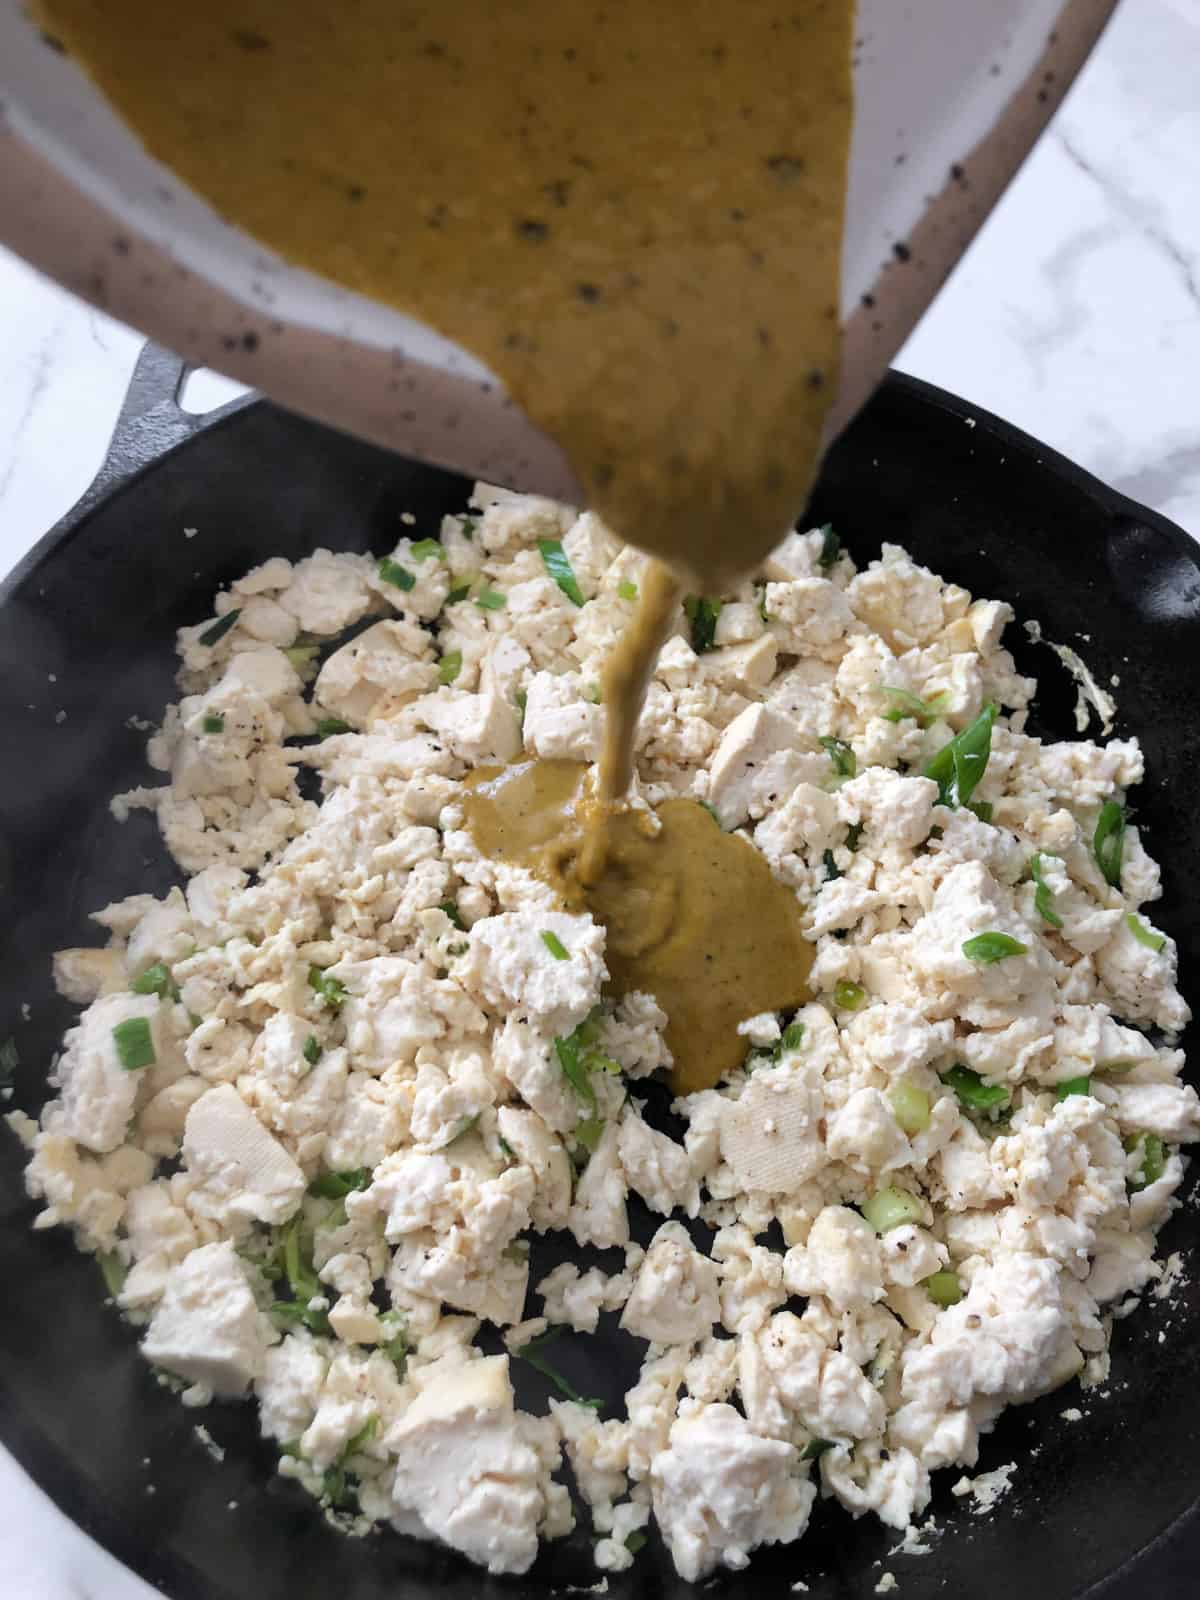 Tofu scramble seasoning being poured into scrambled eggs in a skillet.